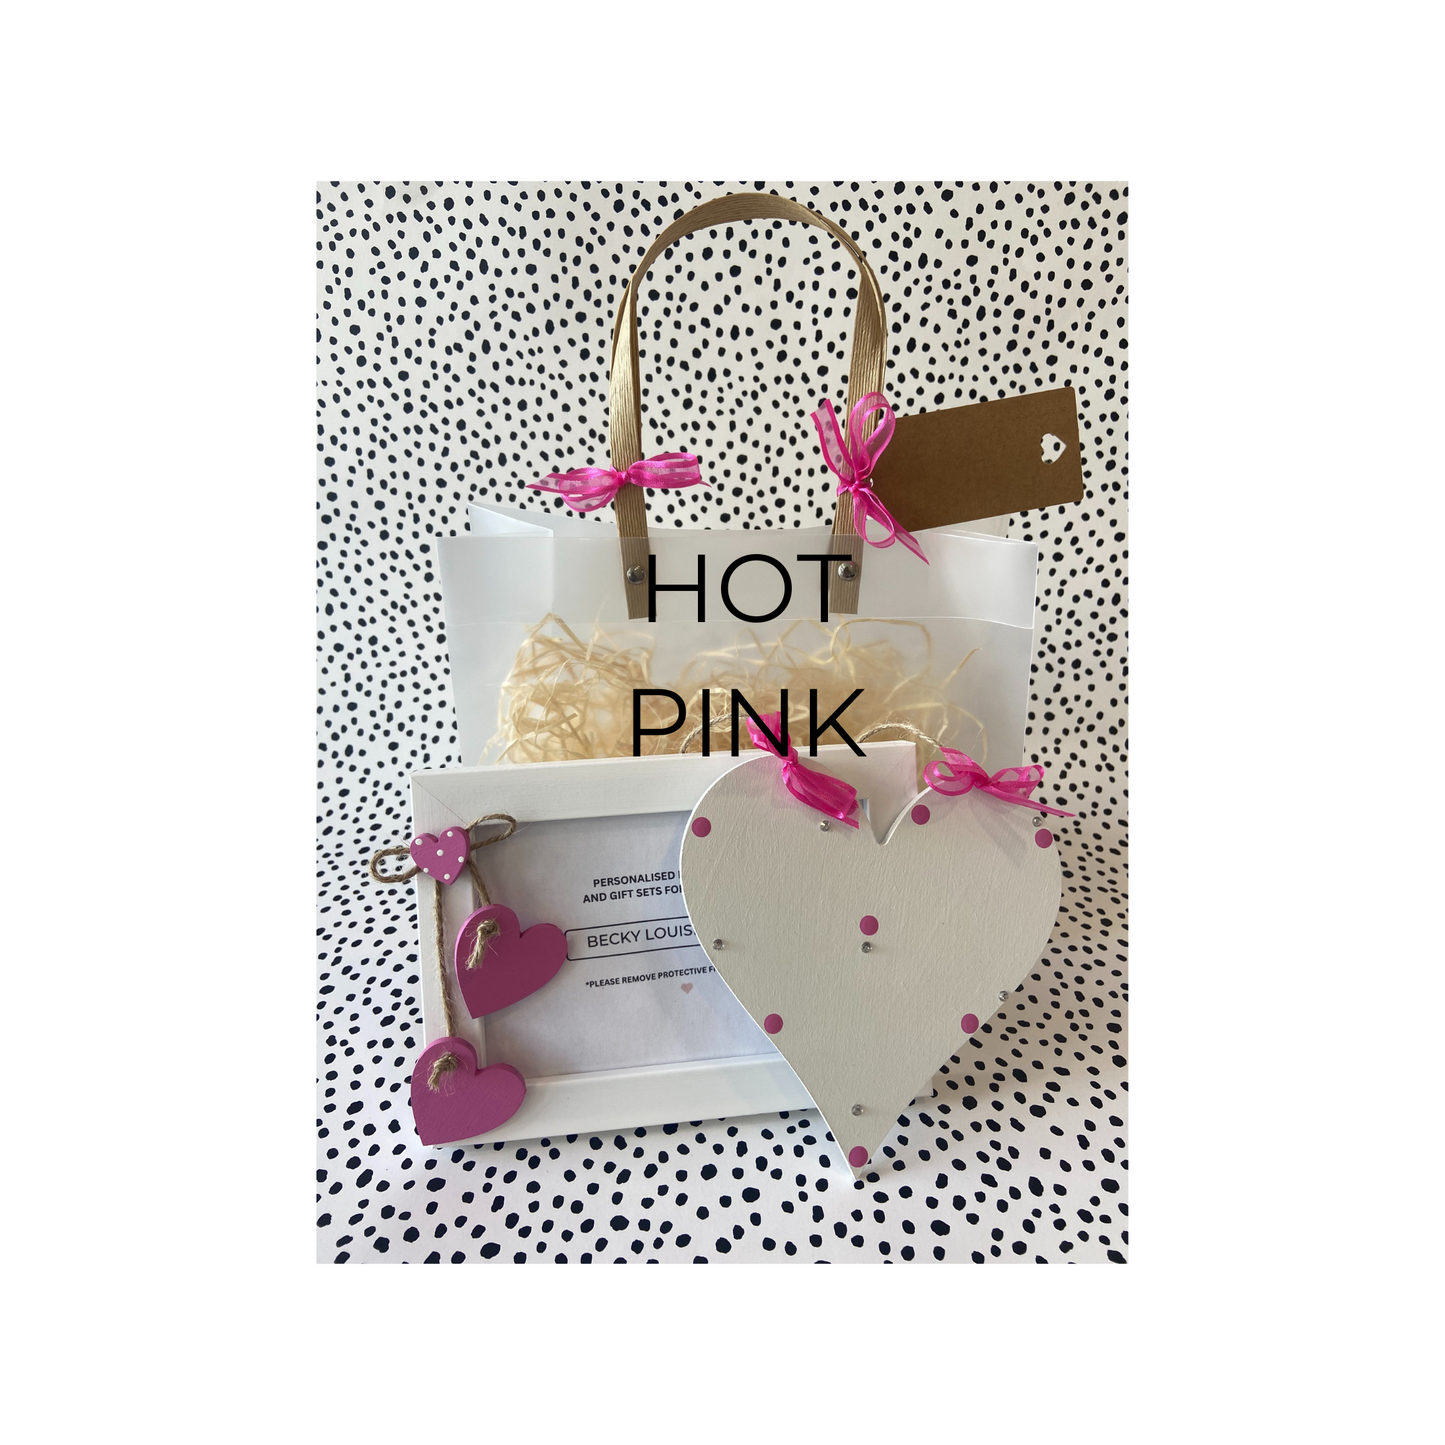 Image shows example of hot pink gift set